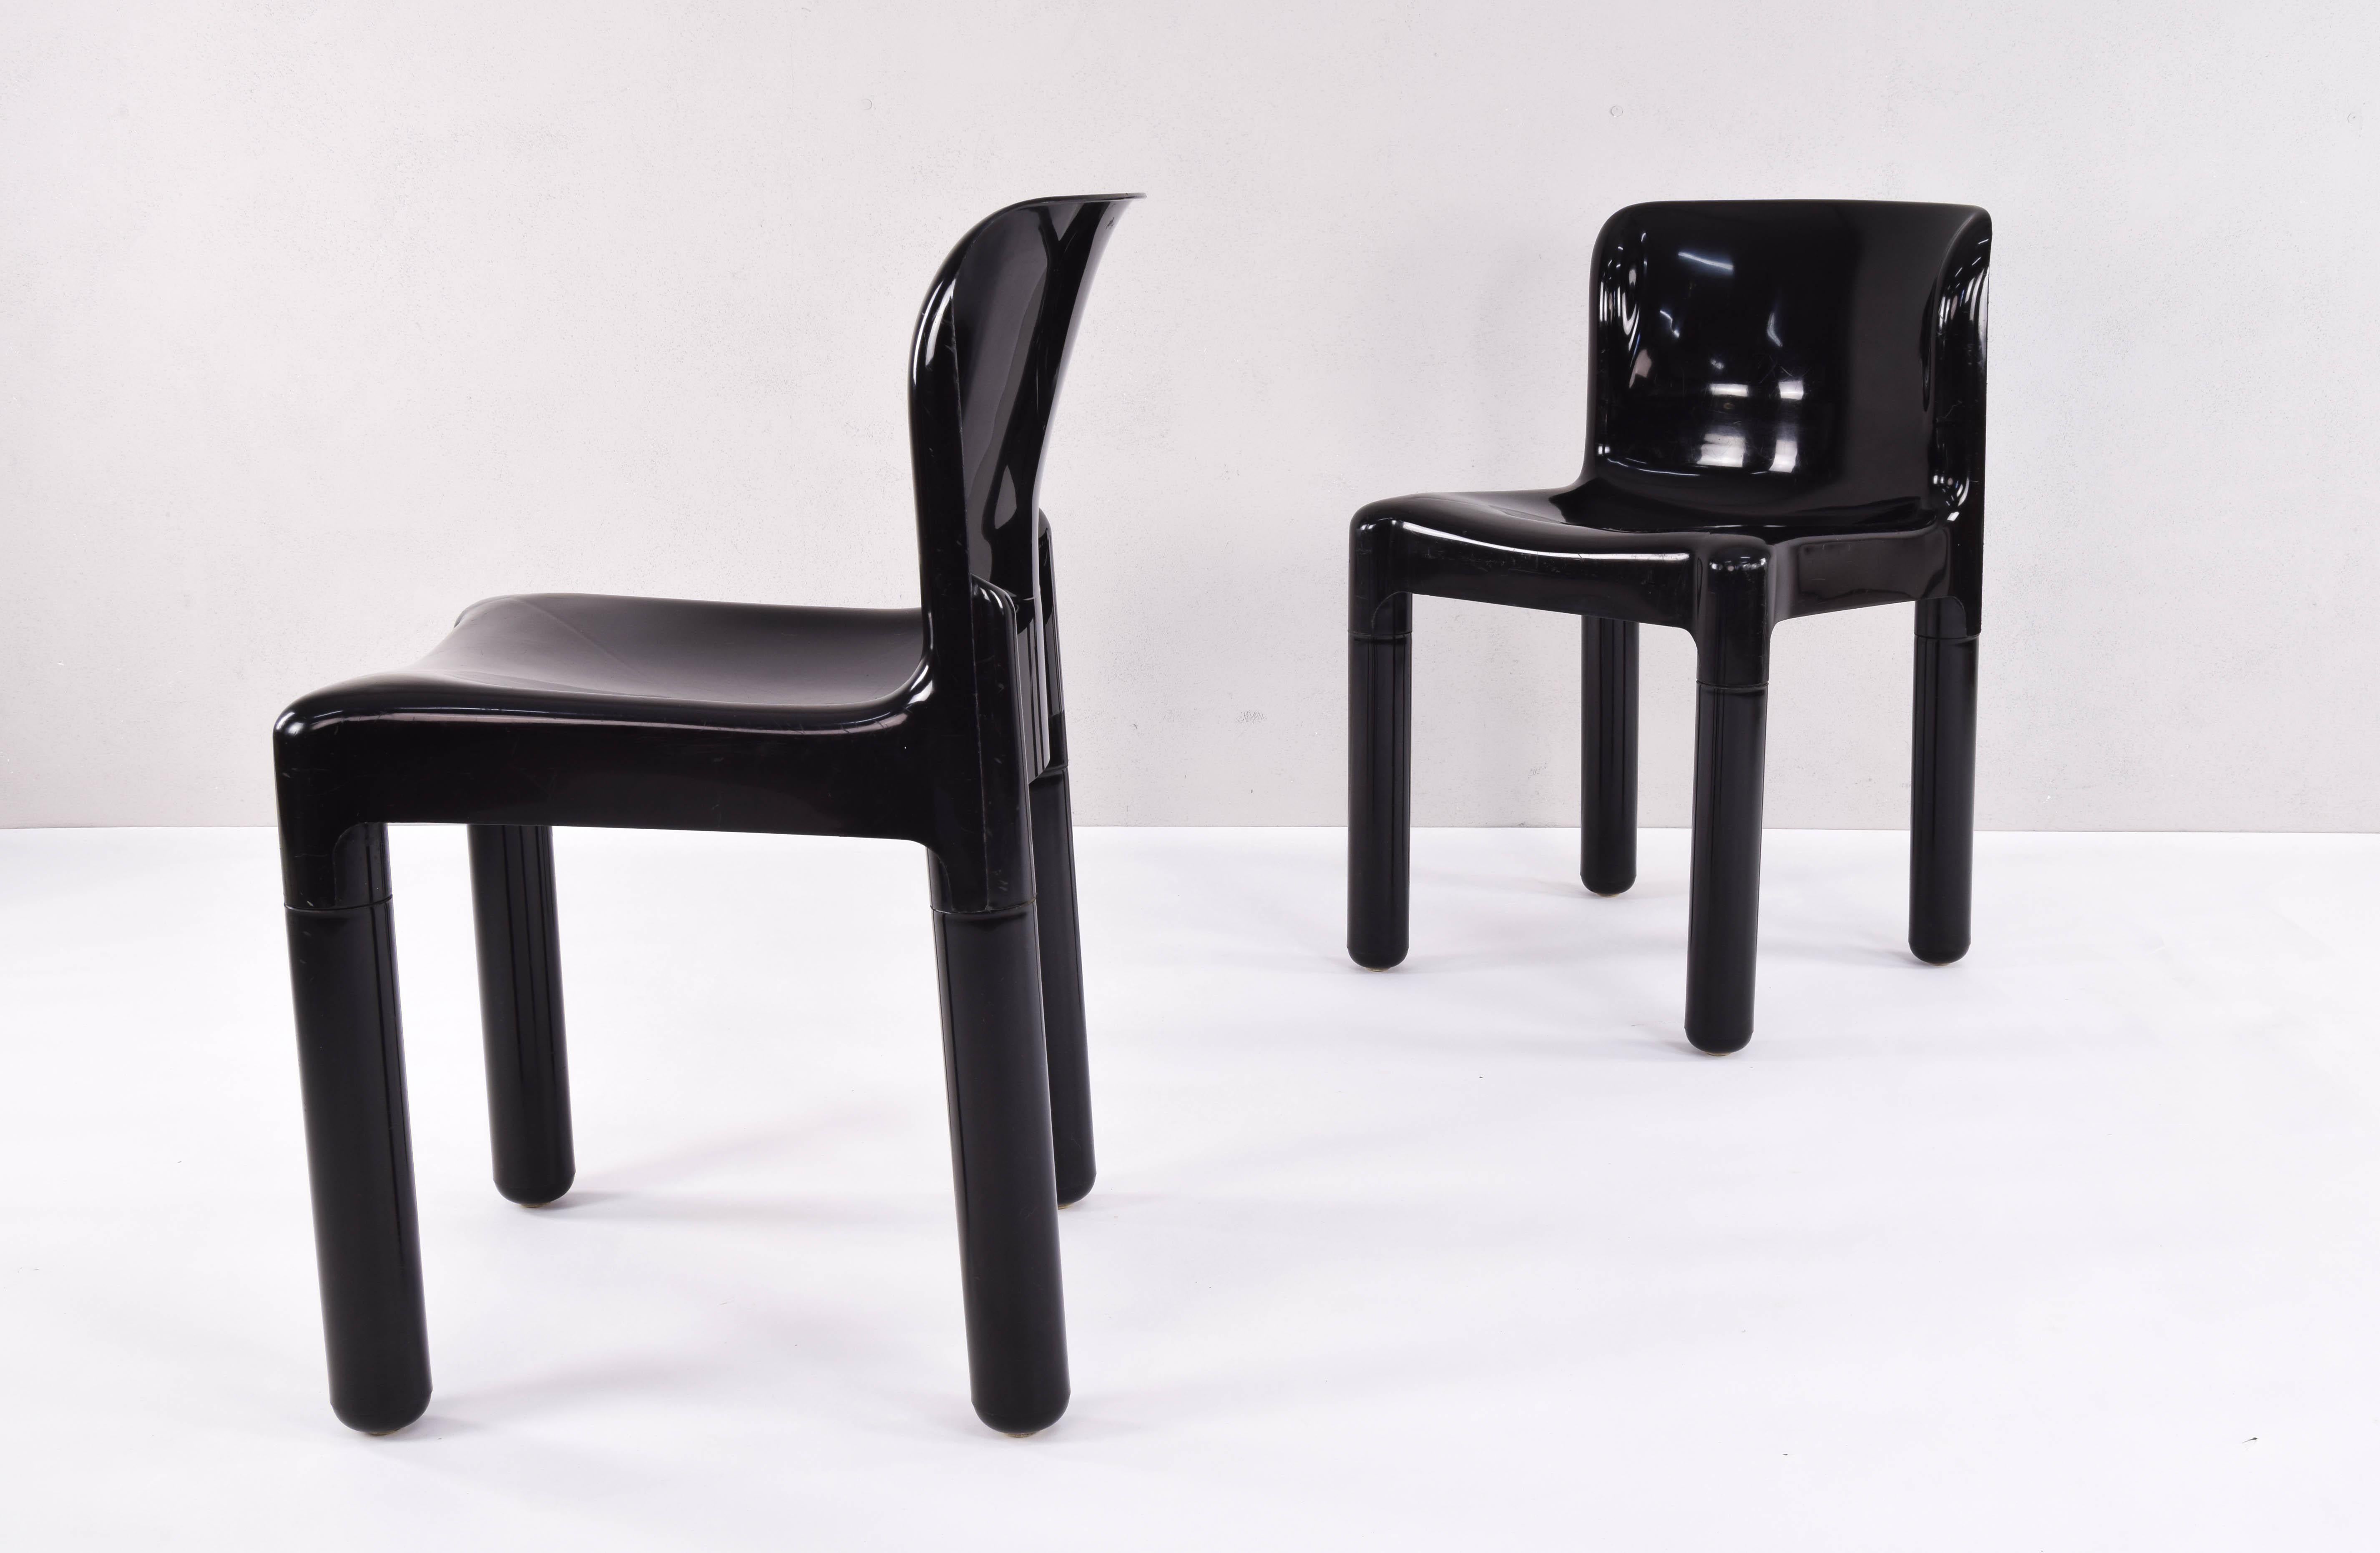 Pair of 4875 model chairs, designed by Carlo Bartoli for Kartell Italia in the 1970s.
Made of black polypropylene, it has a practical, ergonomic and resistant design.
The part of the backrest has a concave shape with lateral fins that, in addition